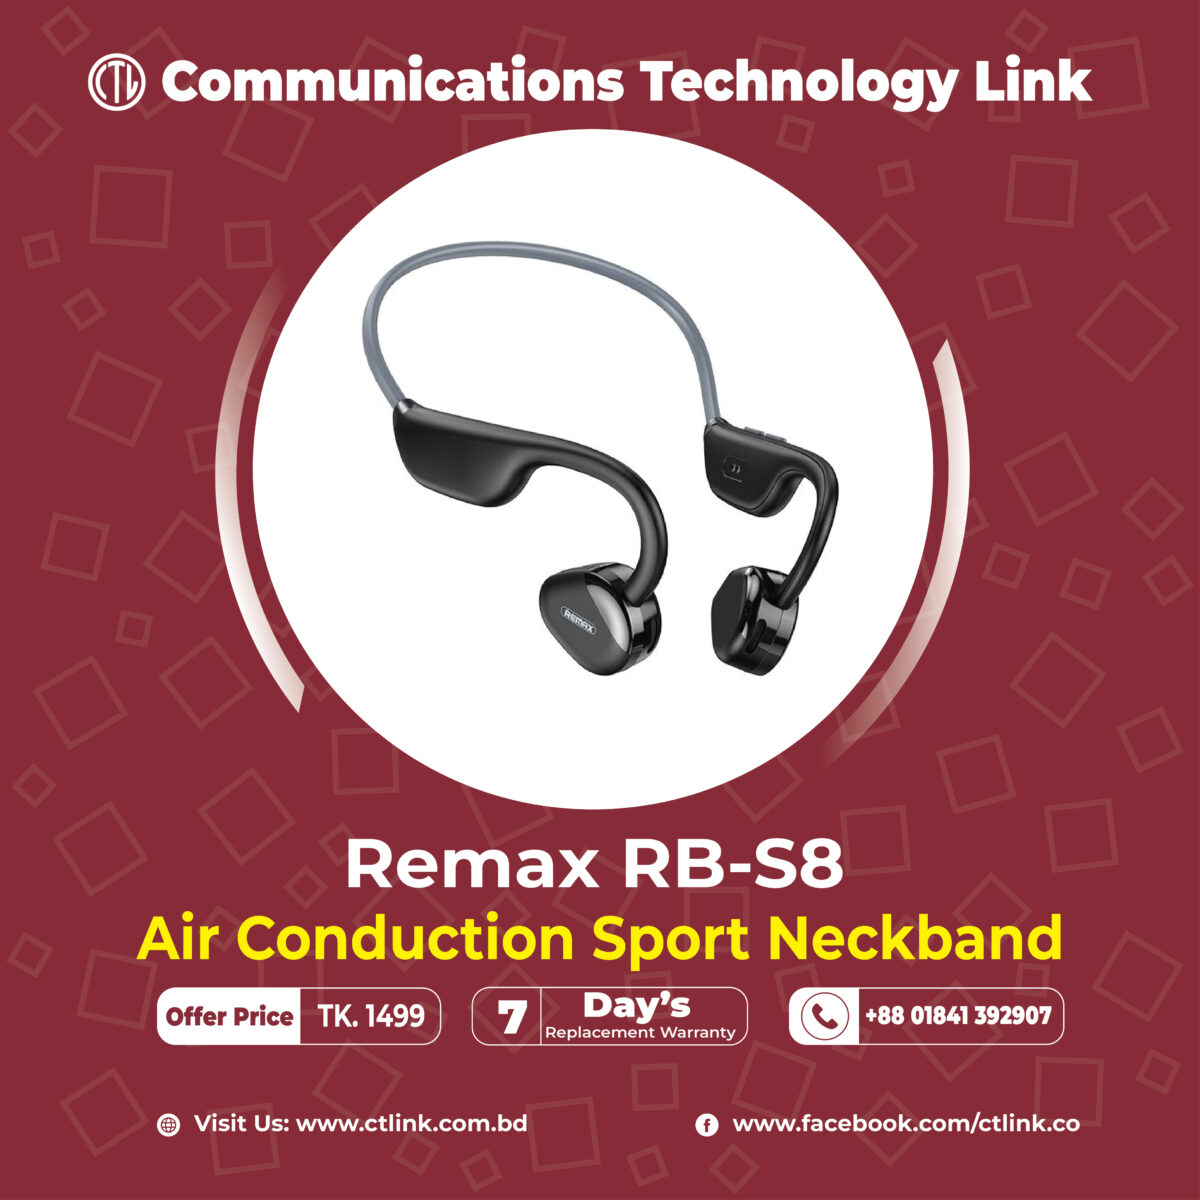 REMAX RB-S8 AIR CONDUCTION